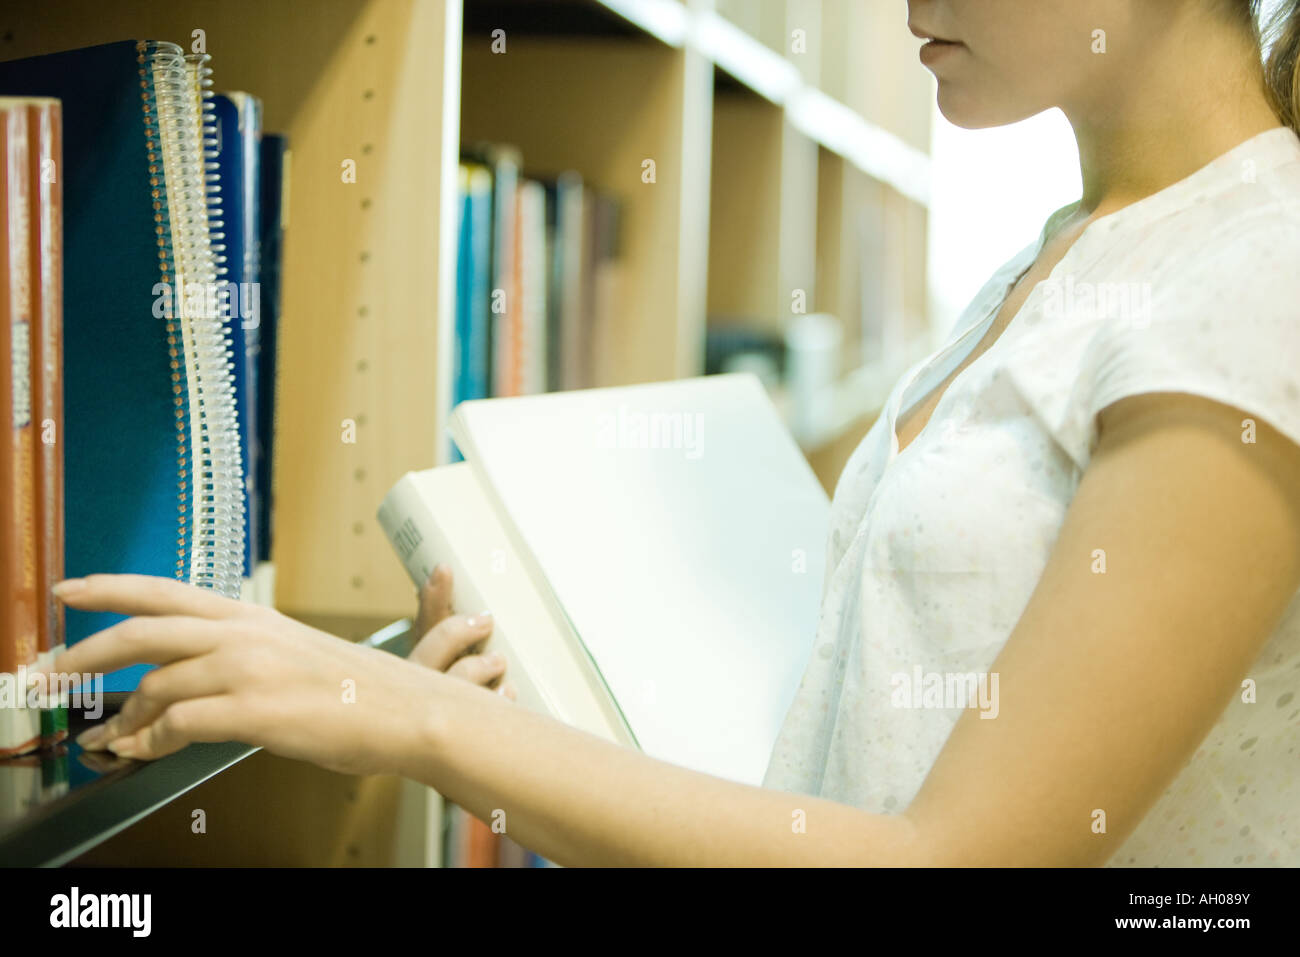 Young woman reaching for books on shelf in library, cropped view Stock Photo